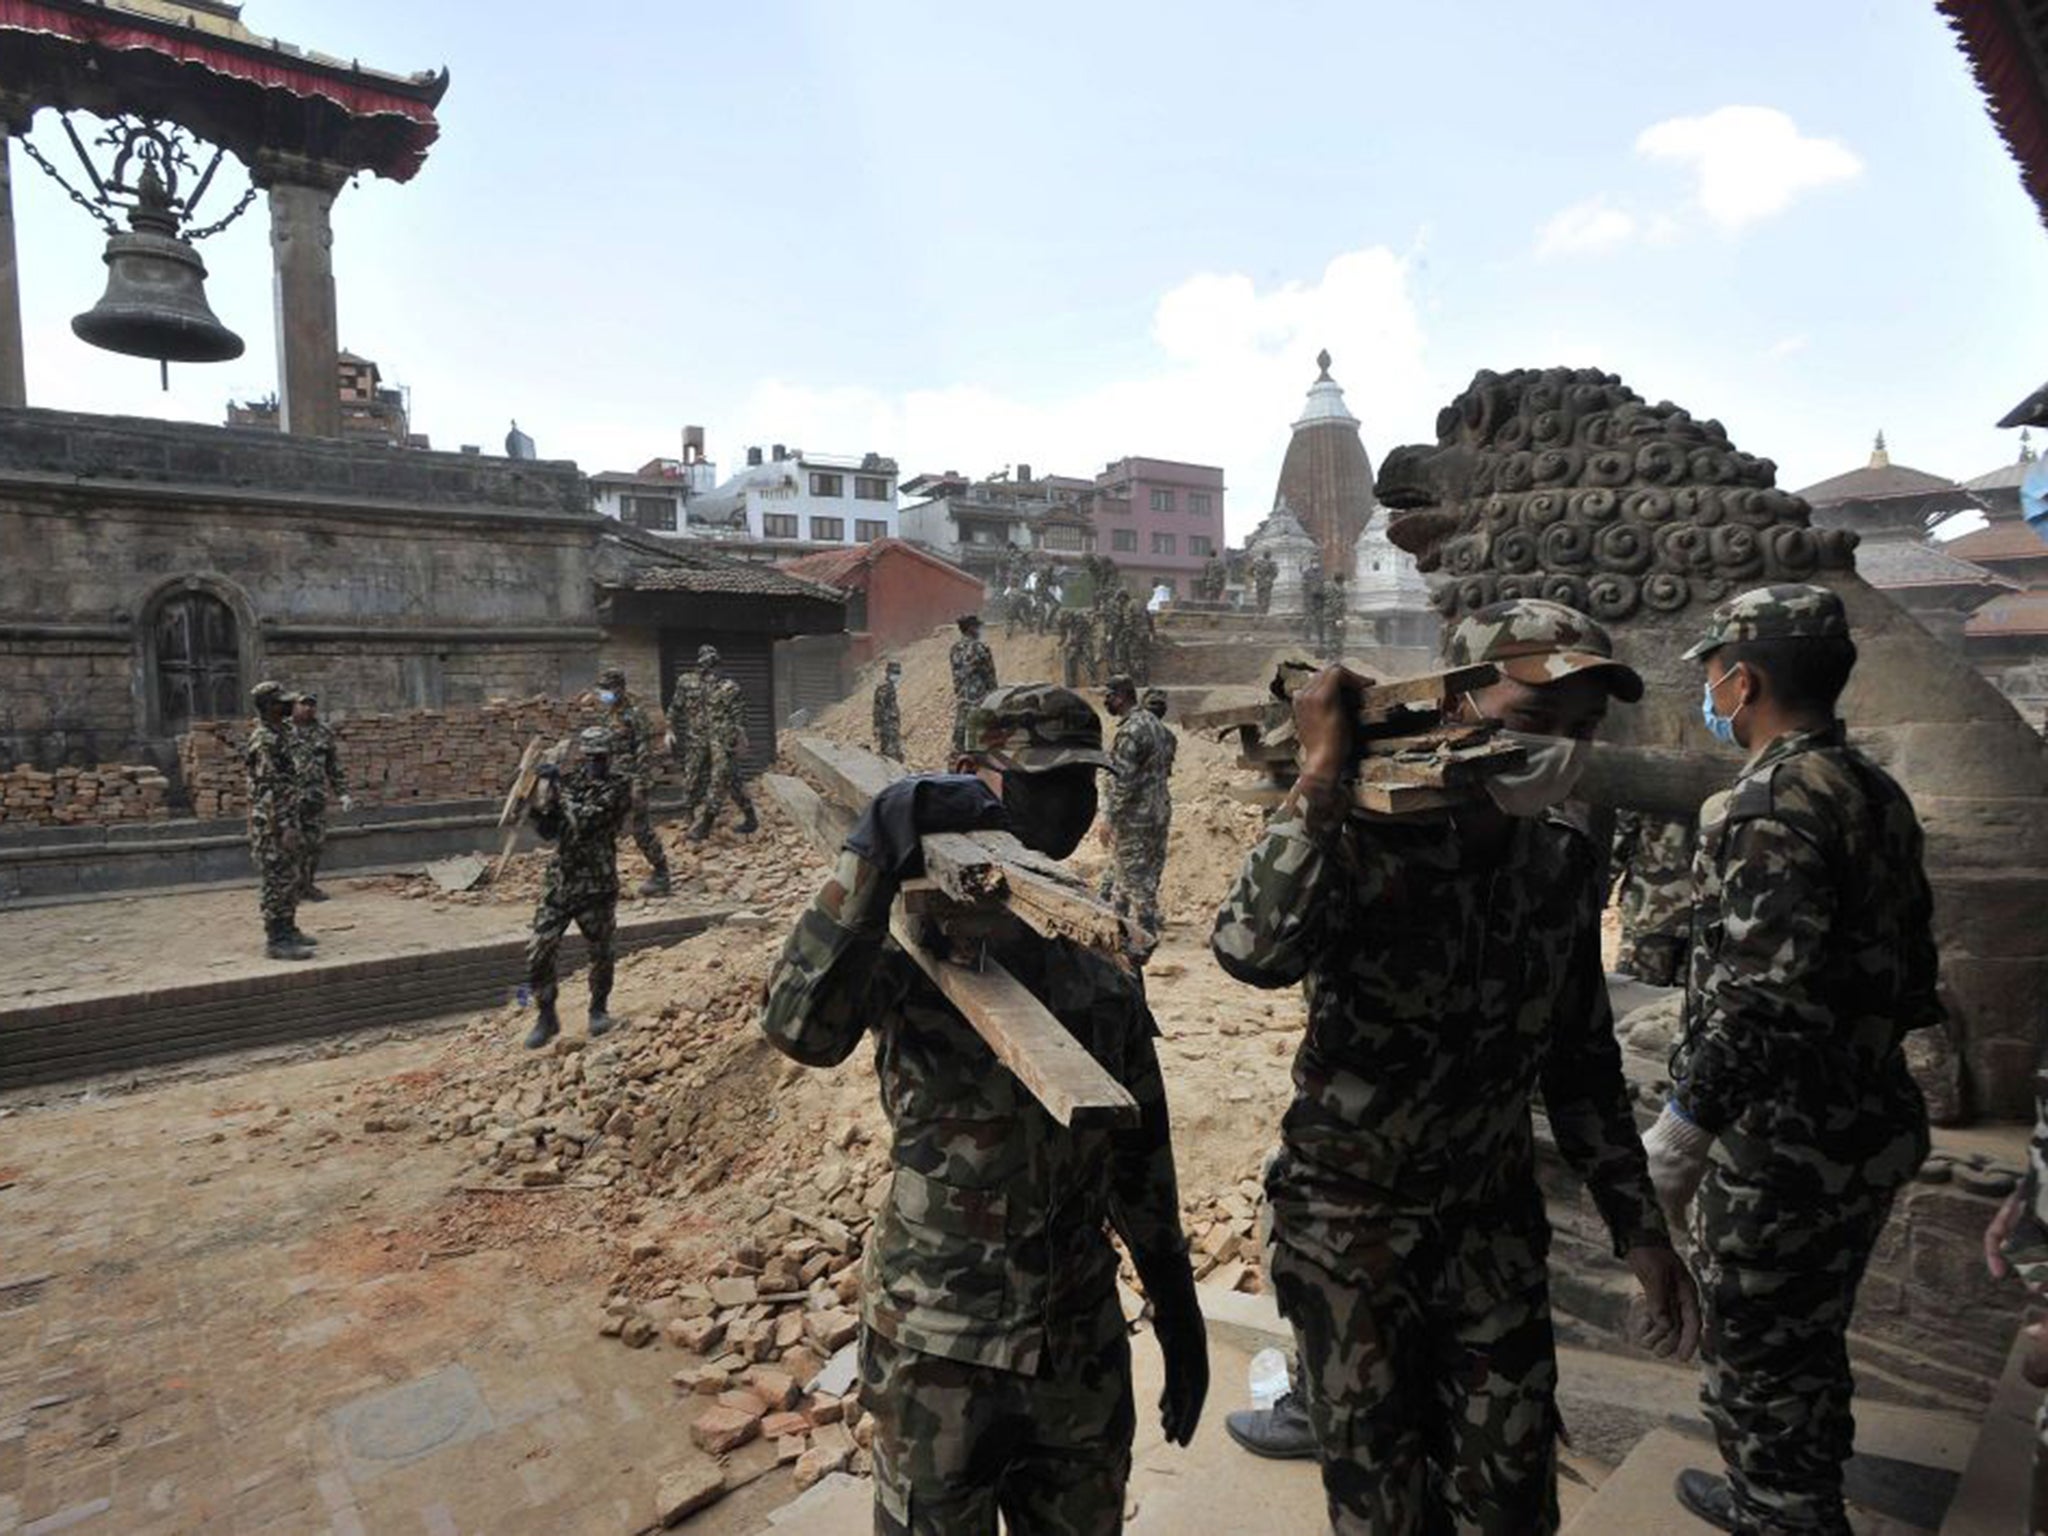 The palaces and temples of Patan Durbar square in Kathmandu have either been destroyed or severely damaged